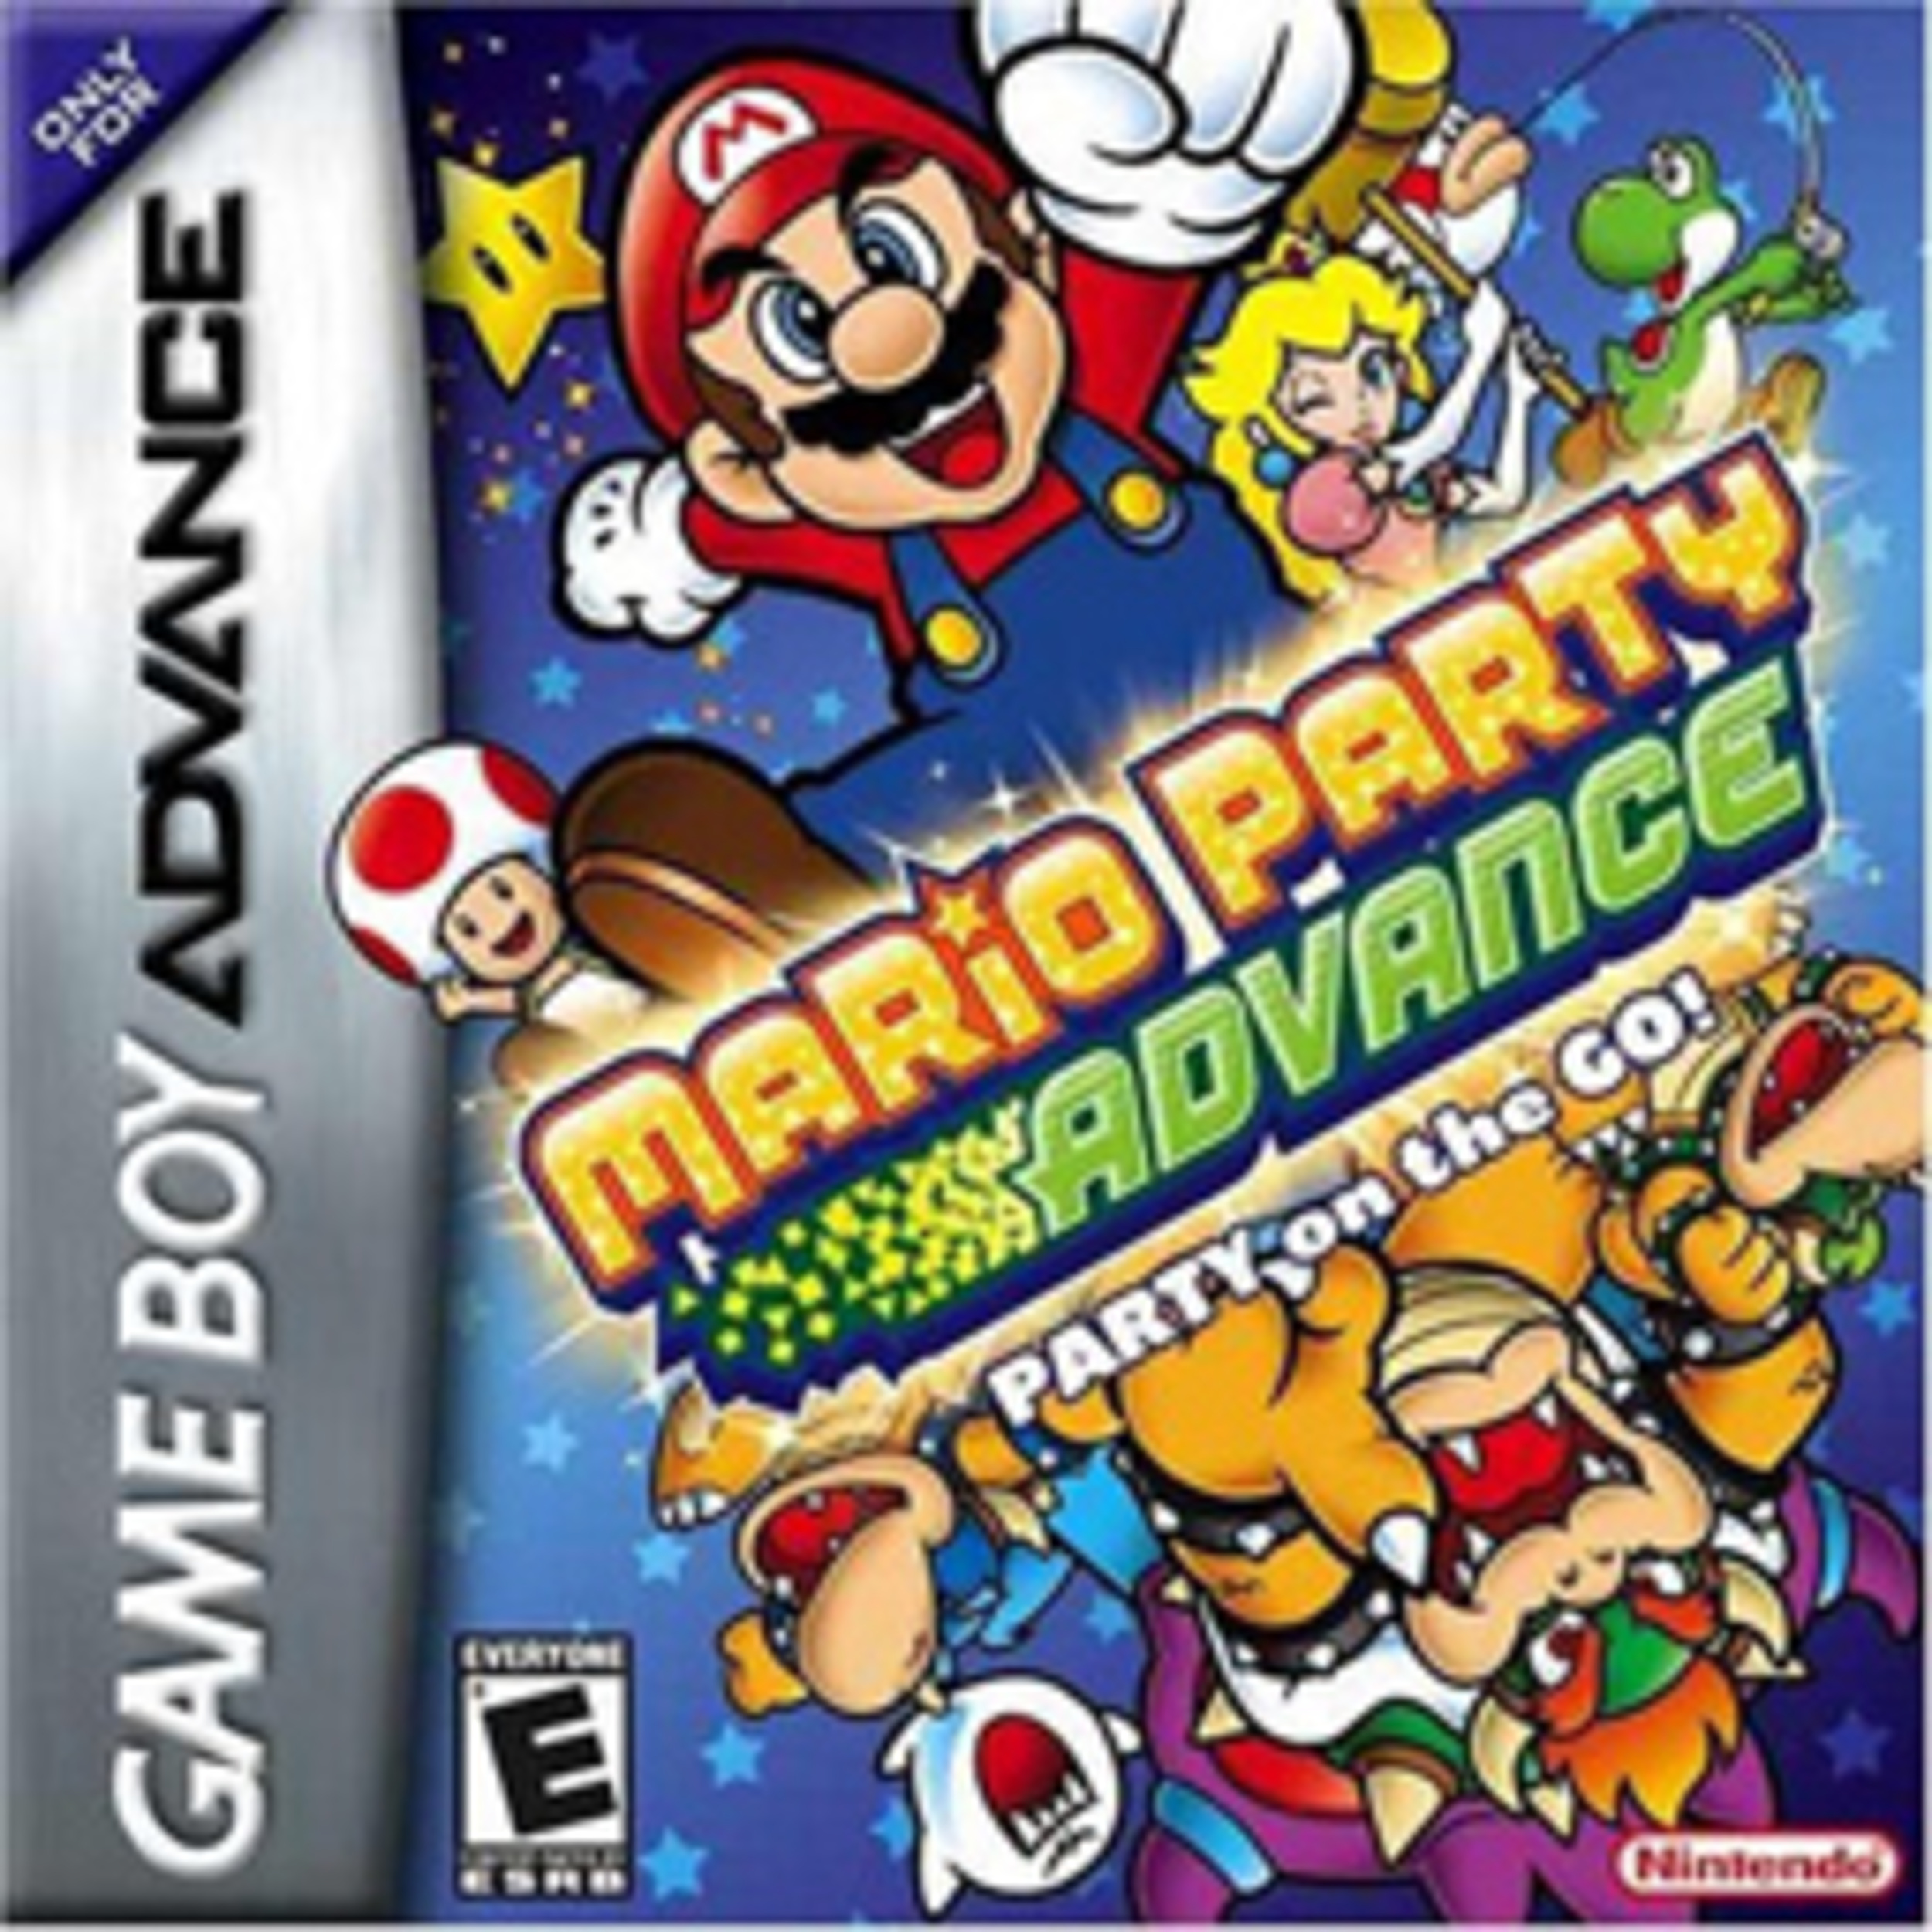 <p>The whole reason for the <em>Mario Party</em> games' success is its inclusion. They are accessible for kids and grownups. Anyone can play the games on an even field, sit together, and root for each other in a party setting. The word "party" isn't just in the title because it's catchy. </p><p>So, it's bewildering that anyone thought a Game Boy Advance version of <em>Mario Party</em> would work even on a logistical level. It loses the party atmosphere the other games can create by shrinking the action to a portable device. It also didn't help that moving the game to a 2D platform limits the sights and sounds that go into making a successful party on any console, big or small. It also didn't help that some mini-games included with the cartridge offer some of the worst gameplay in the entire series. </p><p>You may also like: <a href='https://www.yardbarker.com/entertainment/articles/20_of_the_best_teen_revenge_movies/s1__40002362'>20 of the best teen revenge movies</a></p>